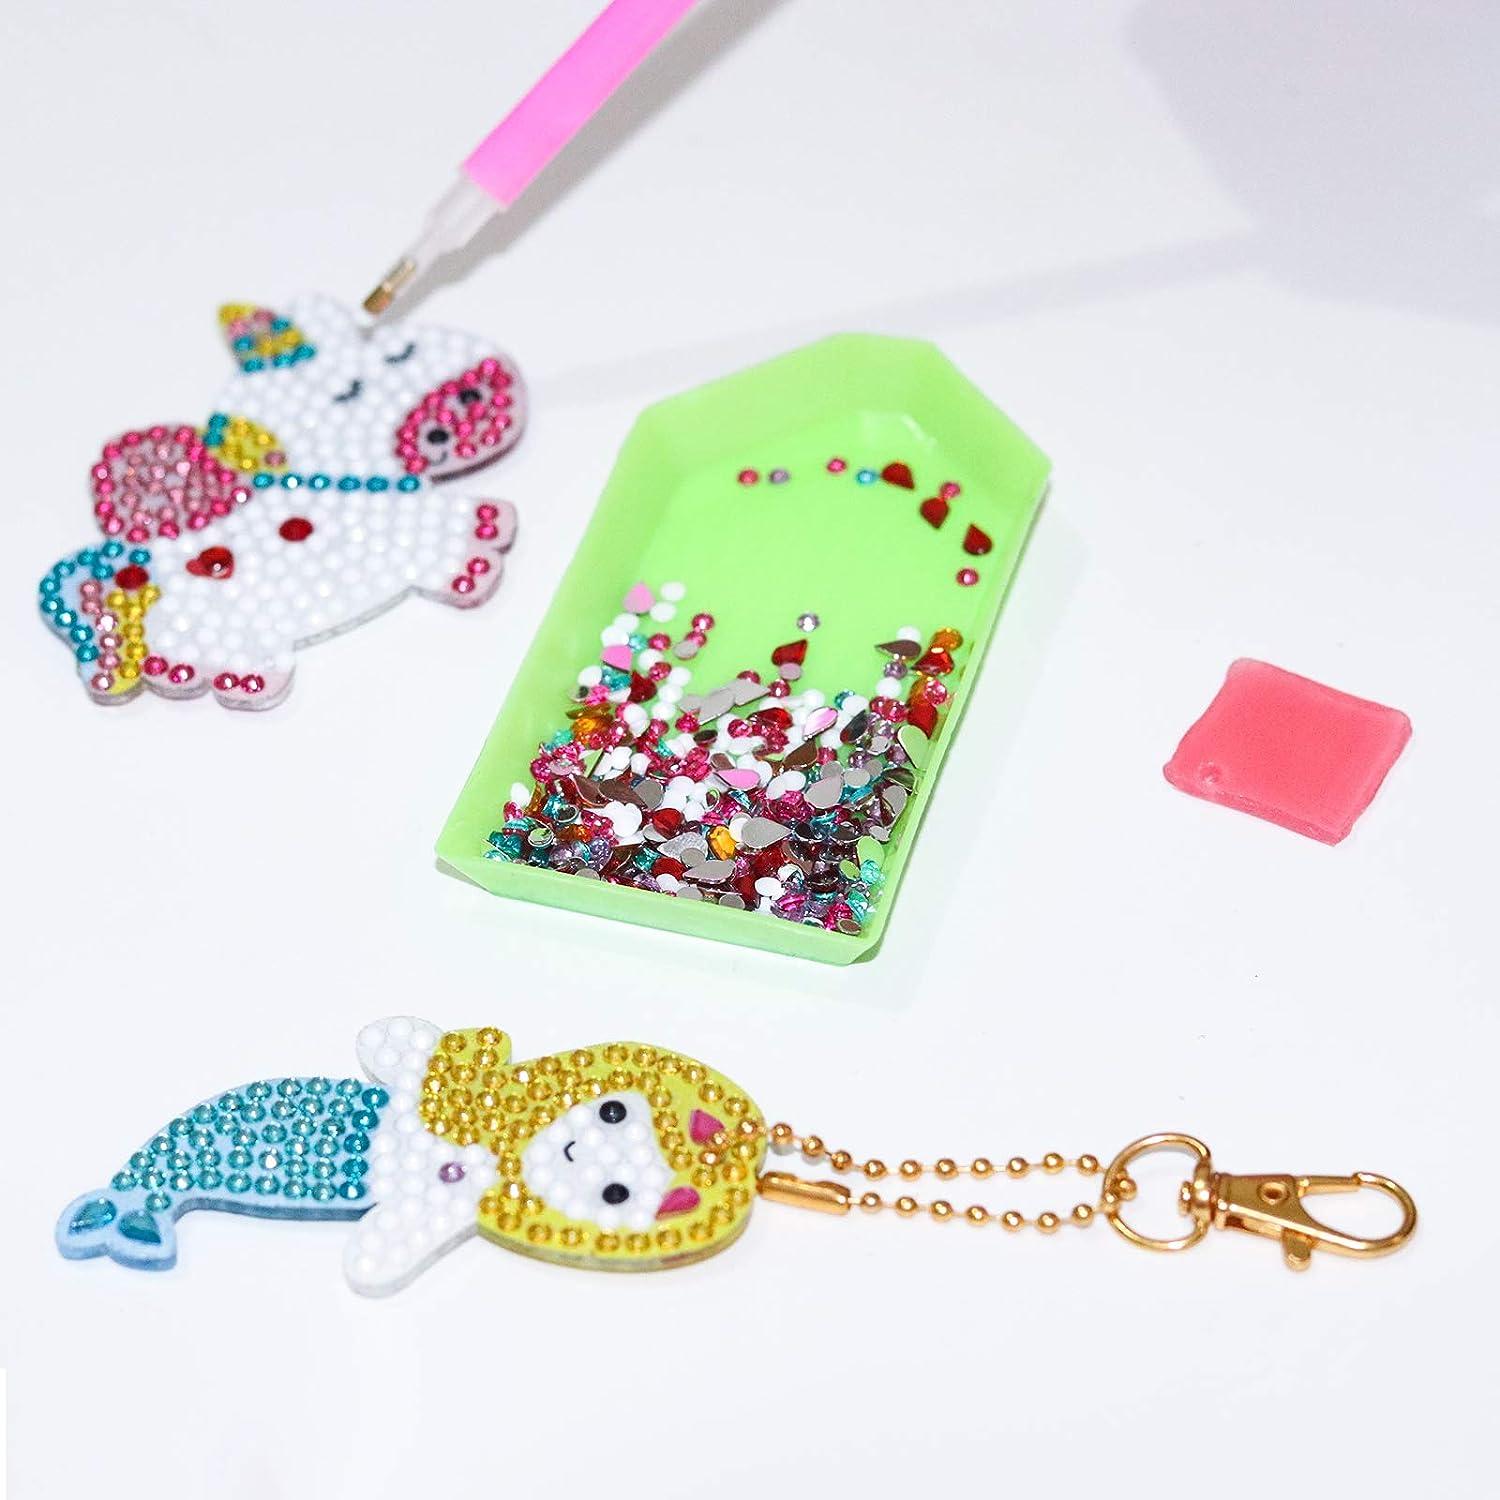 Nardoll Arts and Crafts for Kids Ages 8-12 - Create Your Own Gem Keychains by Number - 5D Diamond Painting Kits Creativity for Girls Boys Toddler